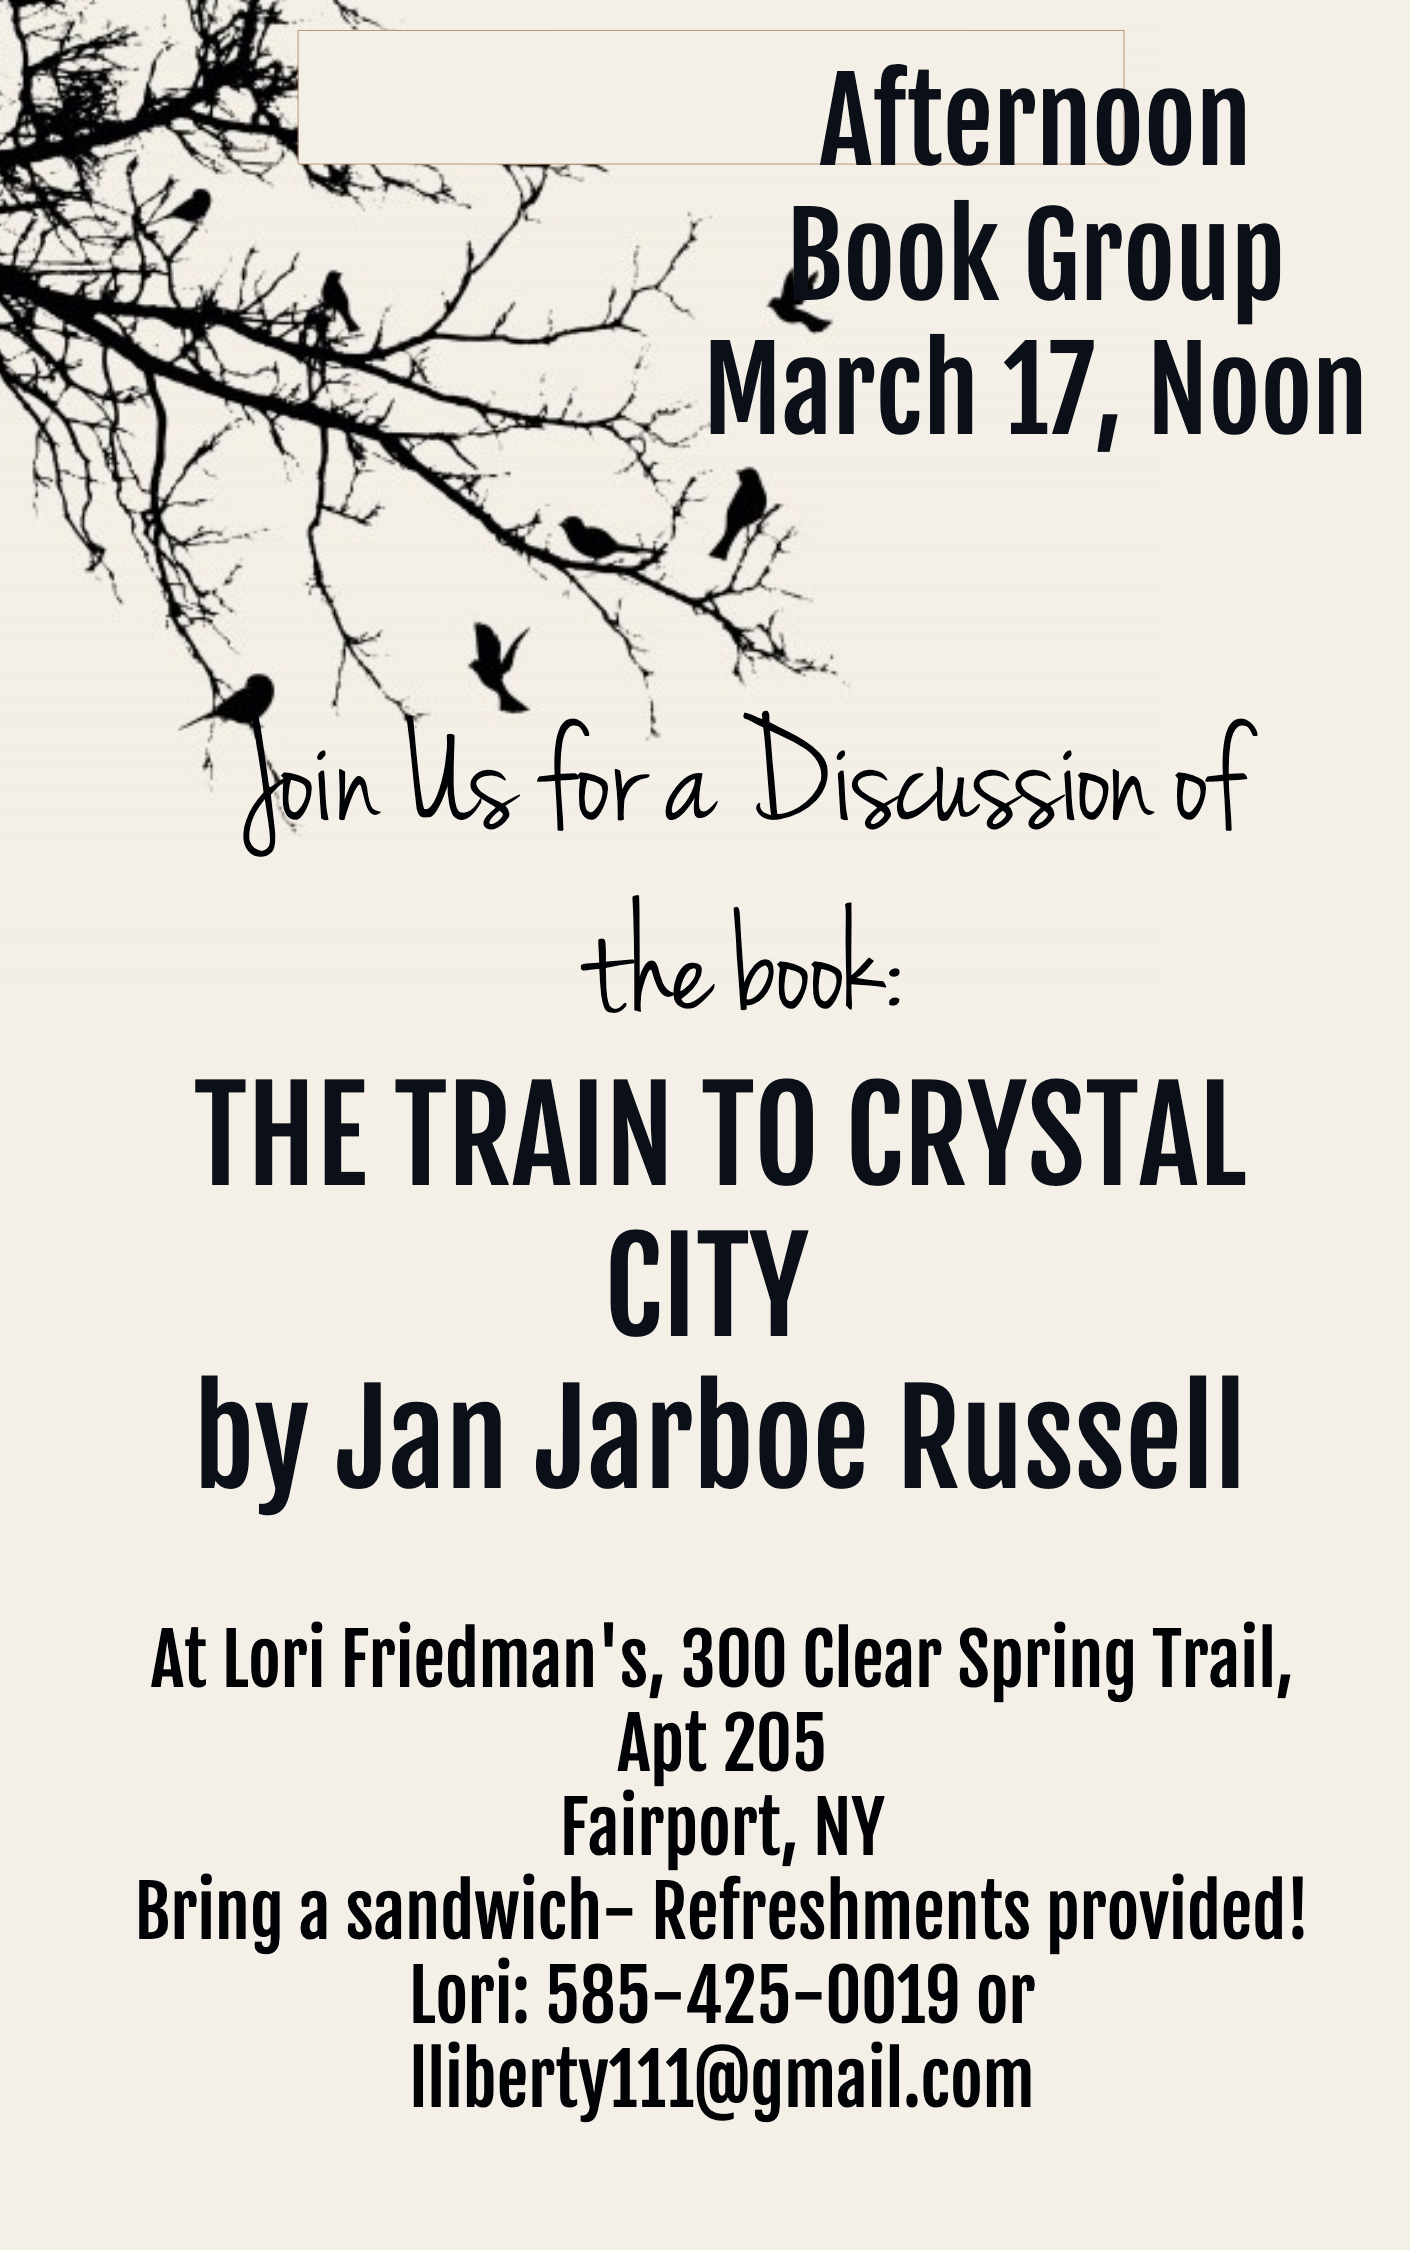 train to crystalKindle Cover - Made with PosterMyWall.jpg